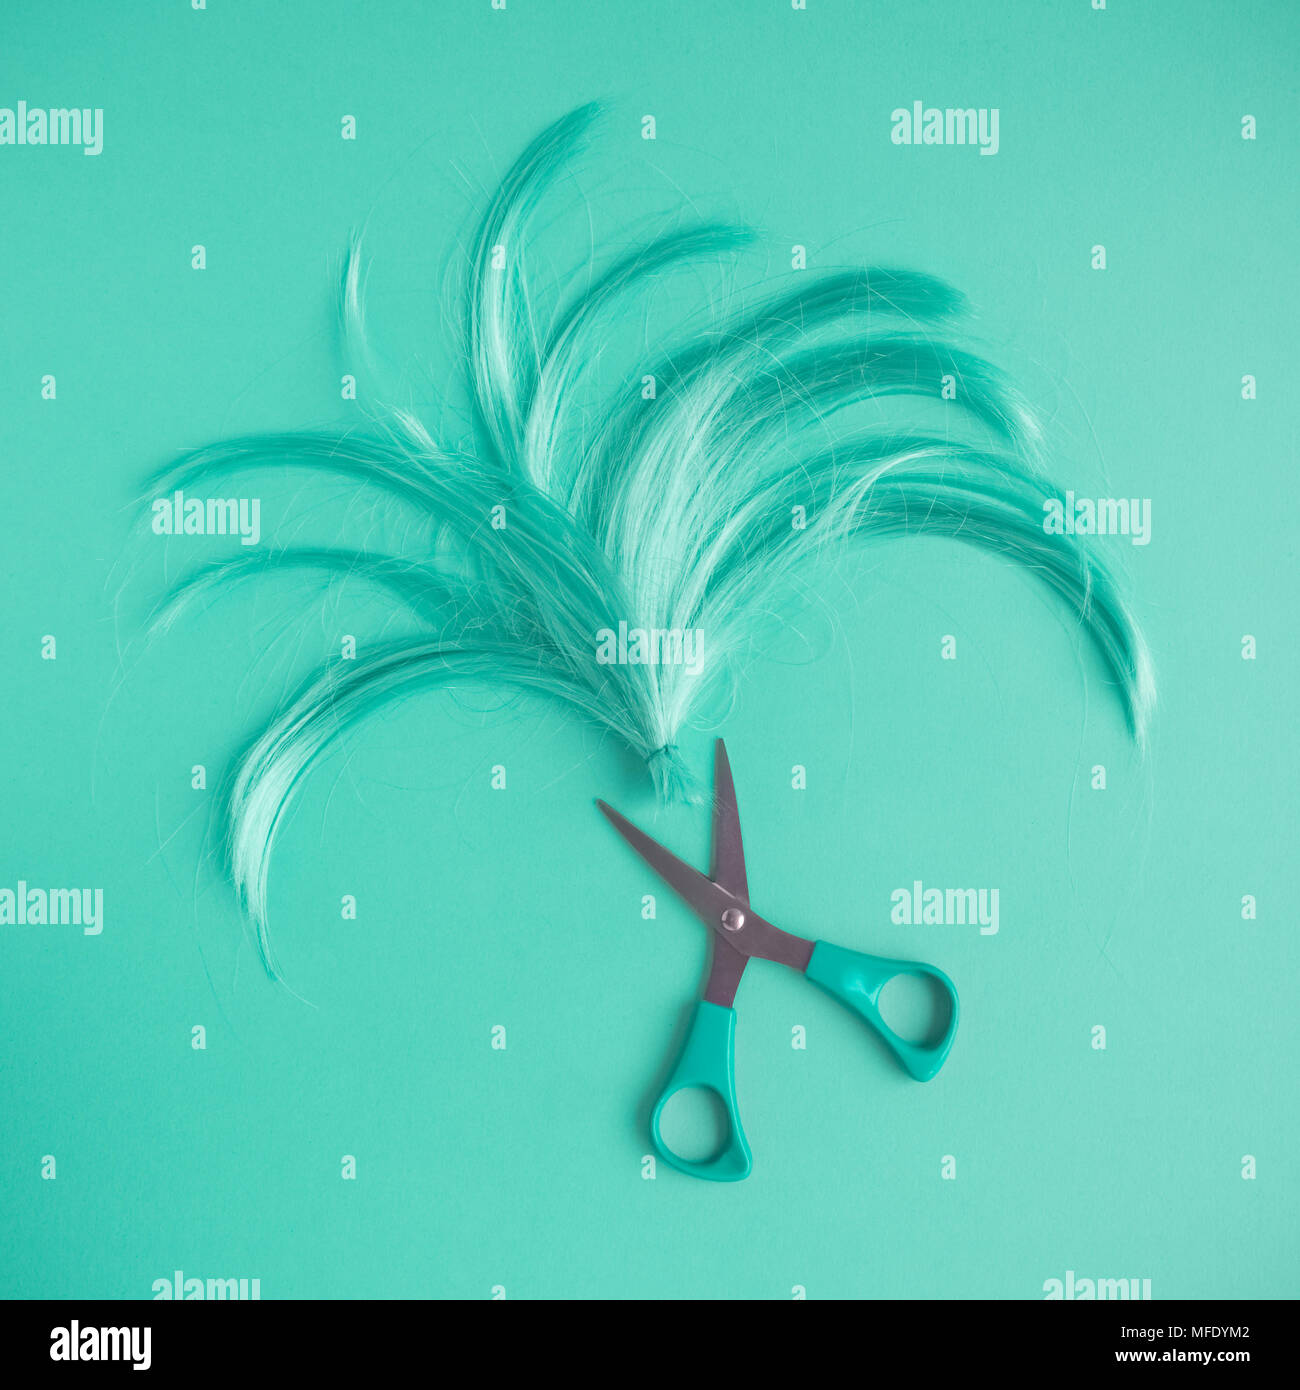 Wig and scissors turquoise tone hairstyle background. Stock Photo